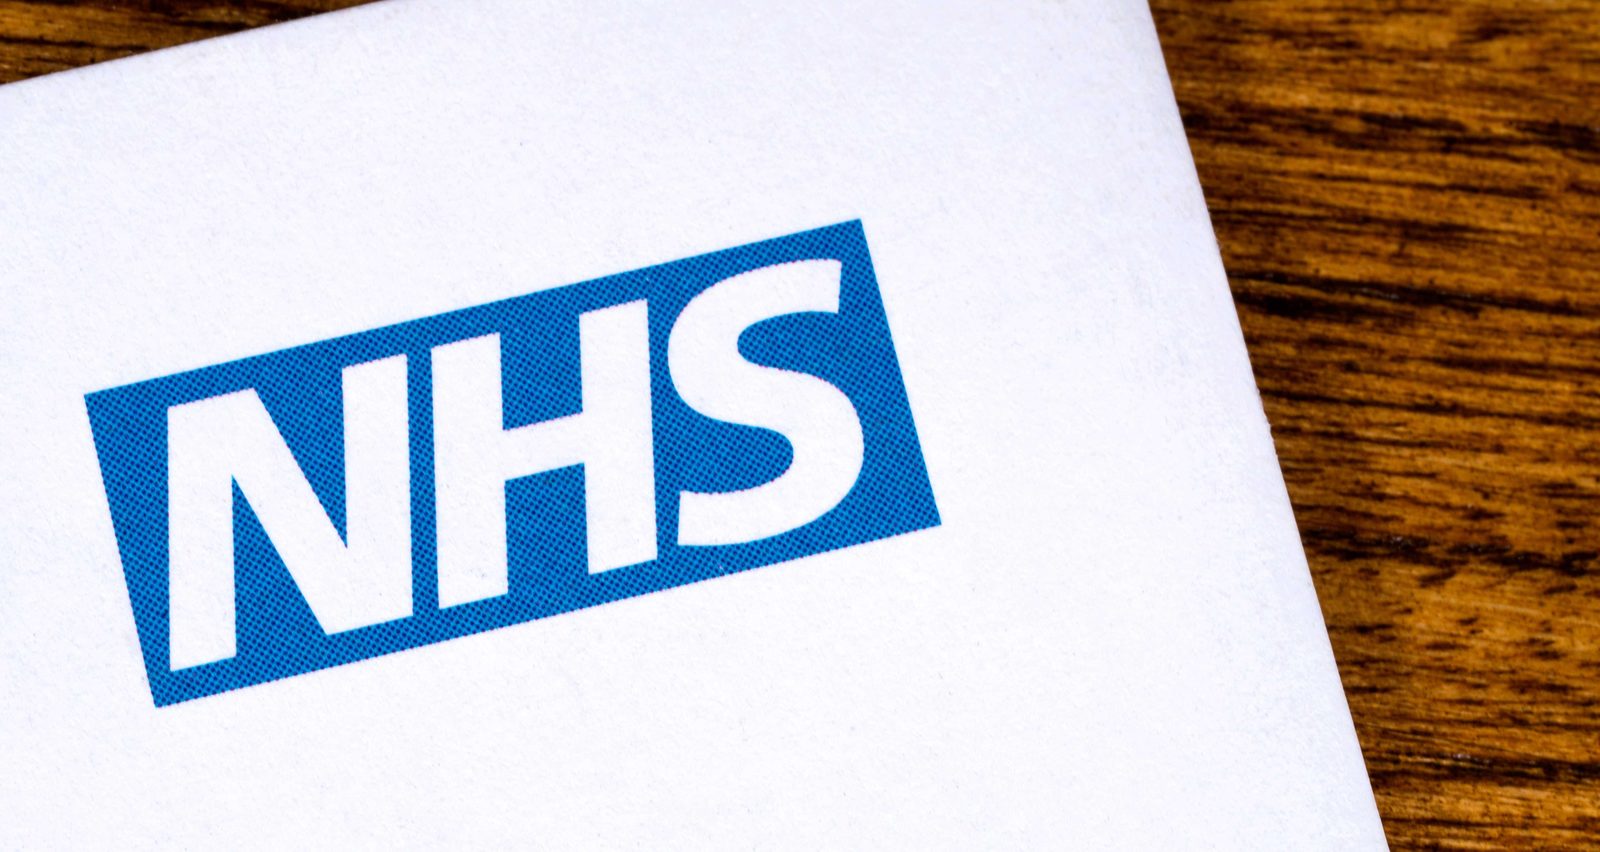 NHS staff due to receive 6.5% pay rise - Dentistry.co.uk